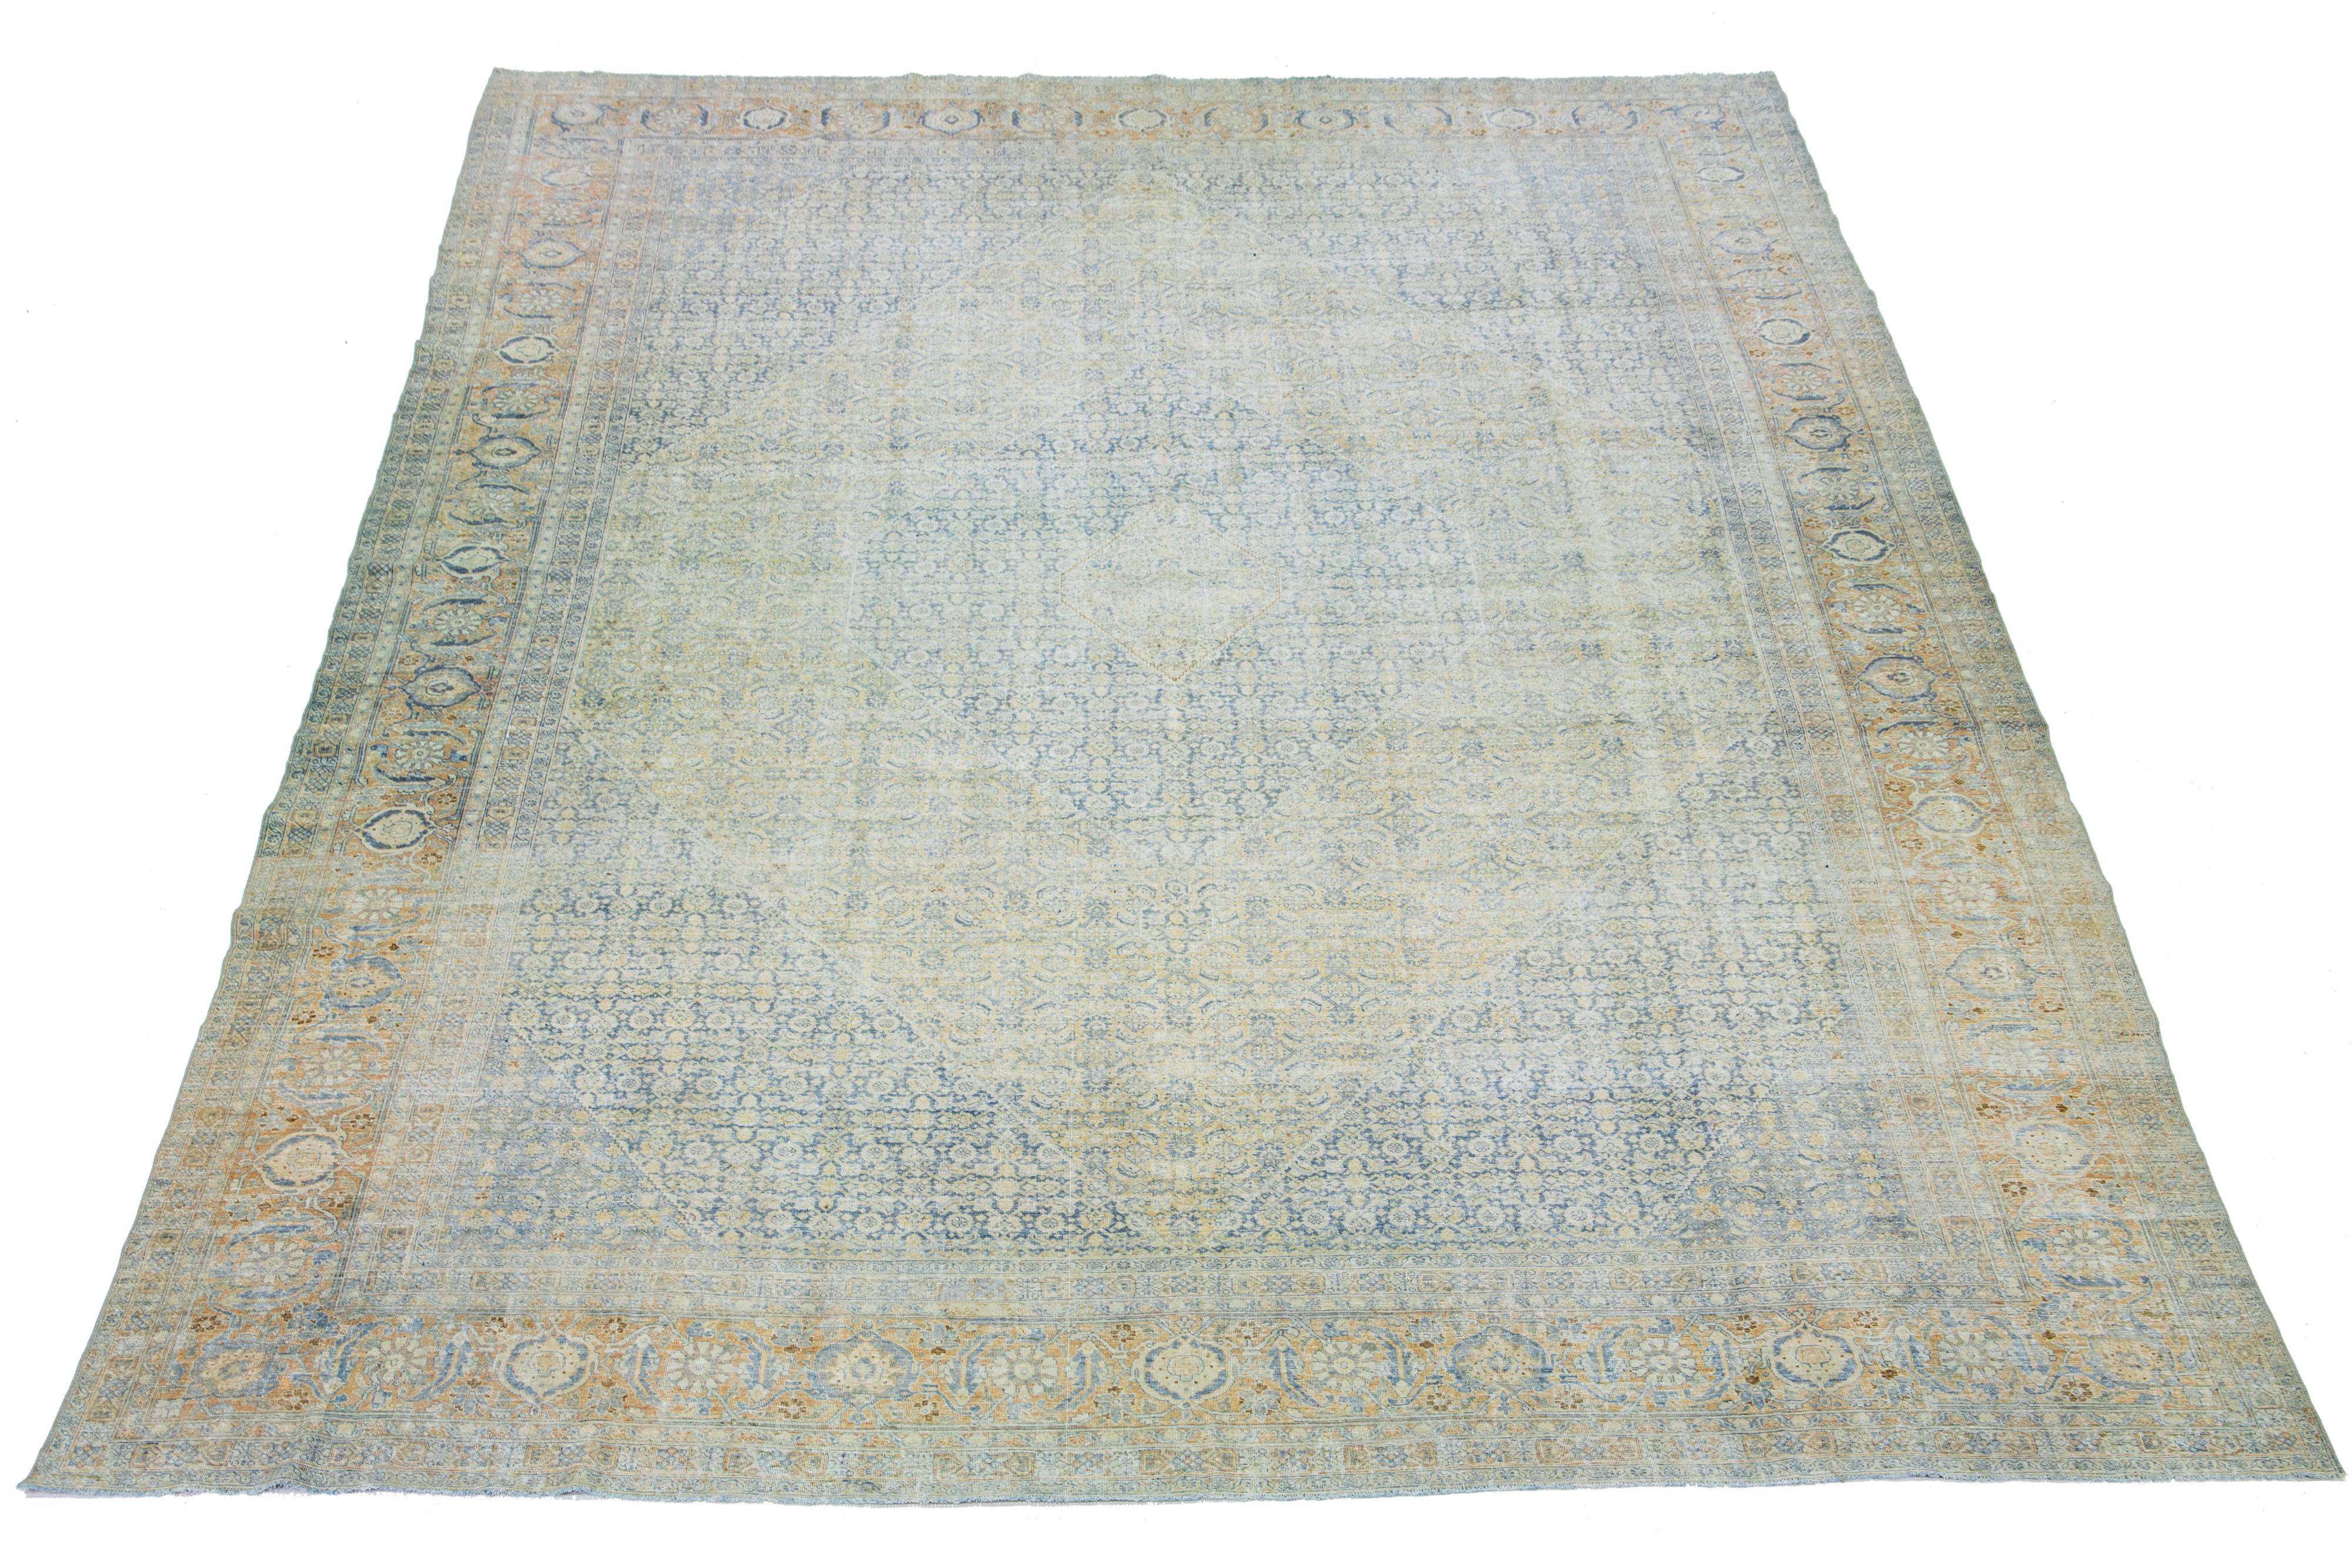 1900s Persian Tabriz wool rug, handcrafted, showcases a traditional floral pattern. The contrast between the light blue backdrop and the yellow, beige, and brown emphasizes the design.

This rug measures 12'7